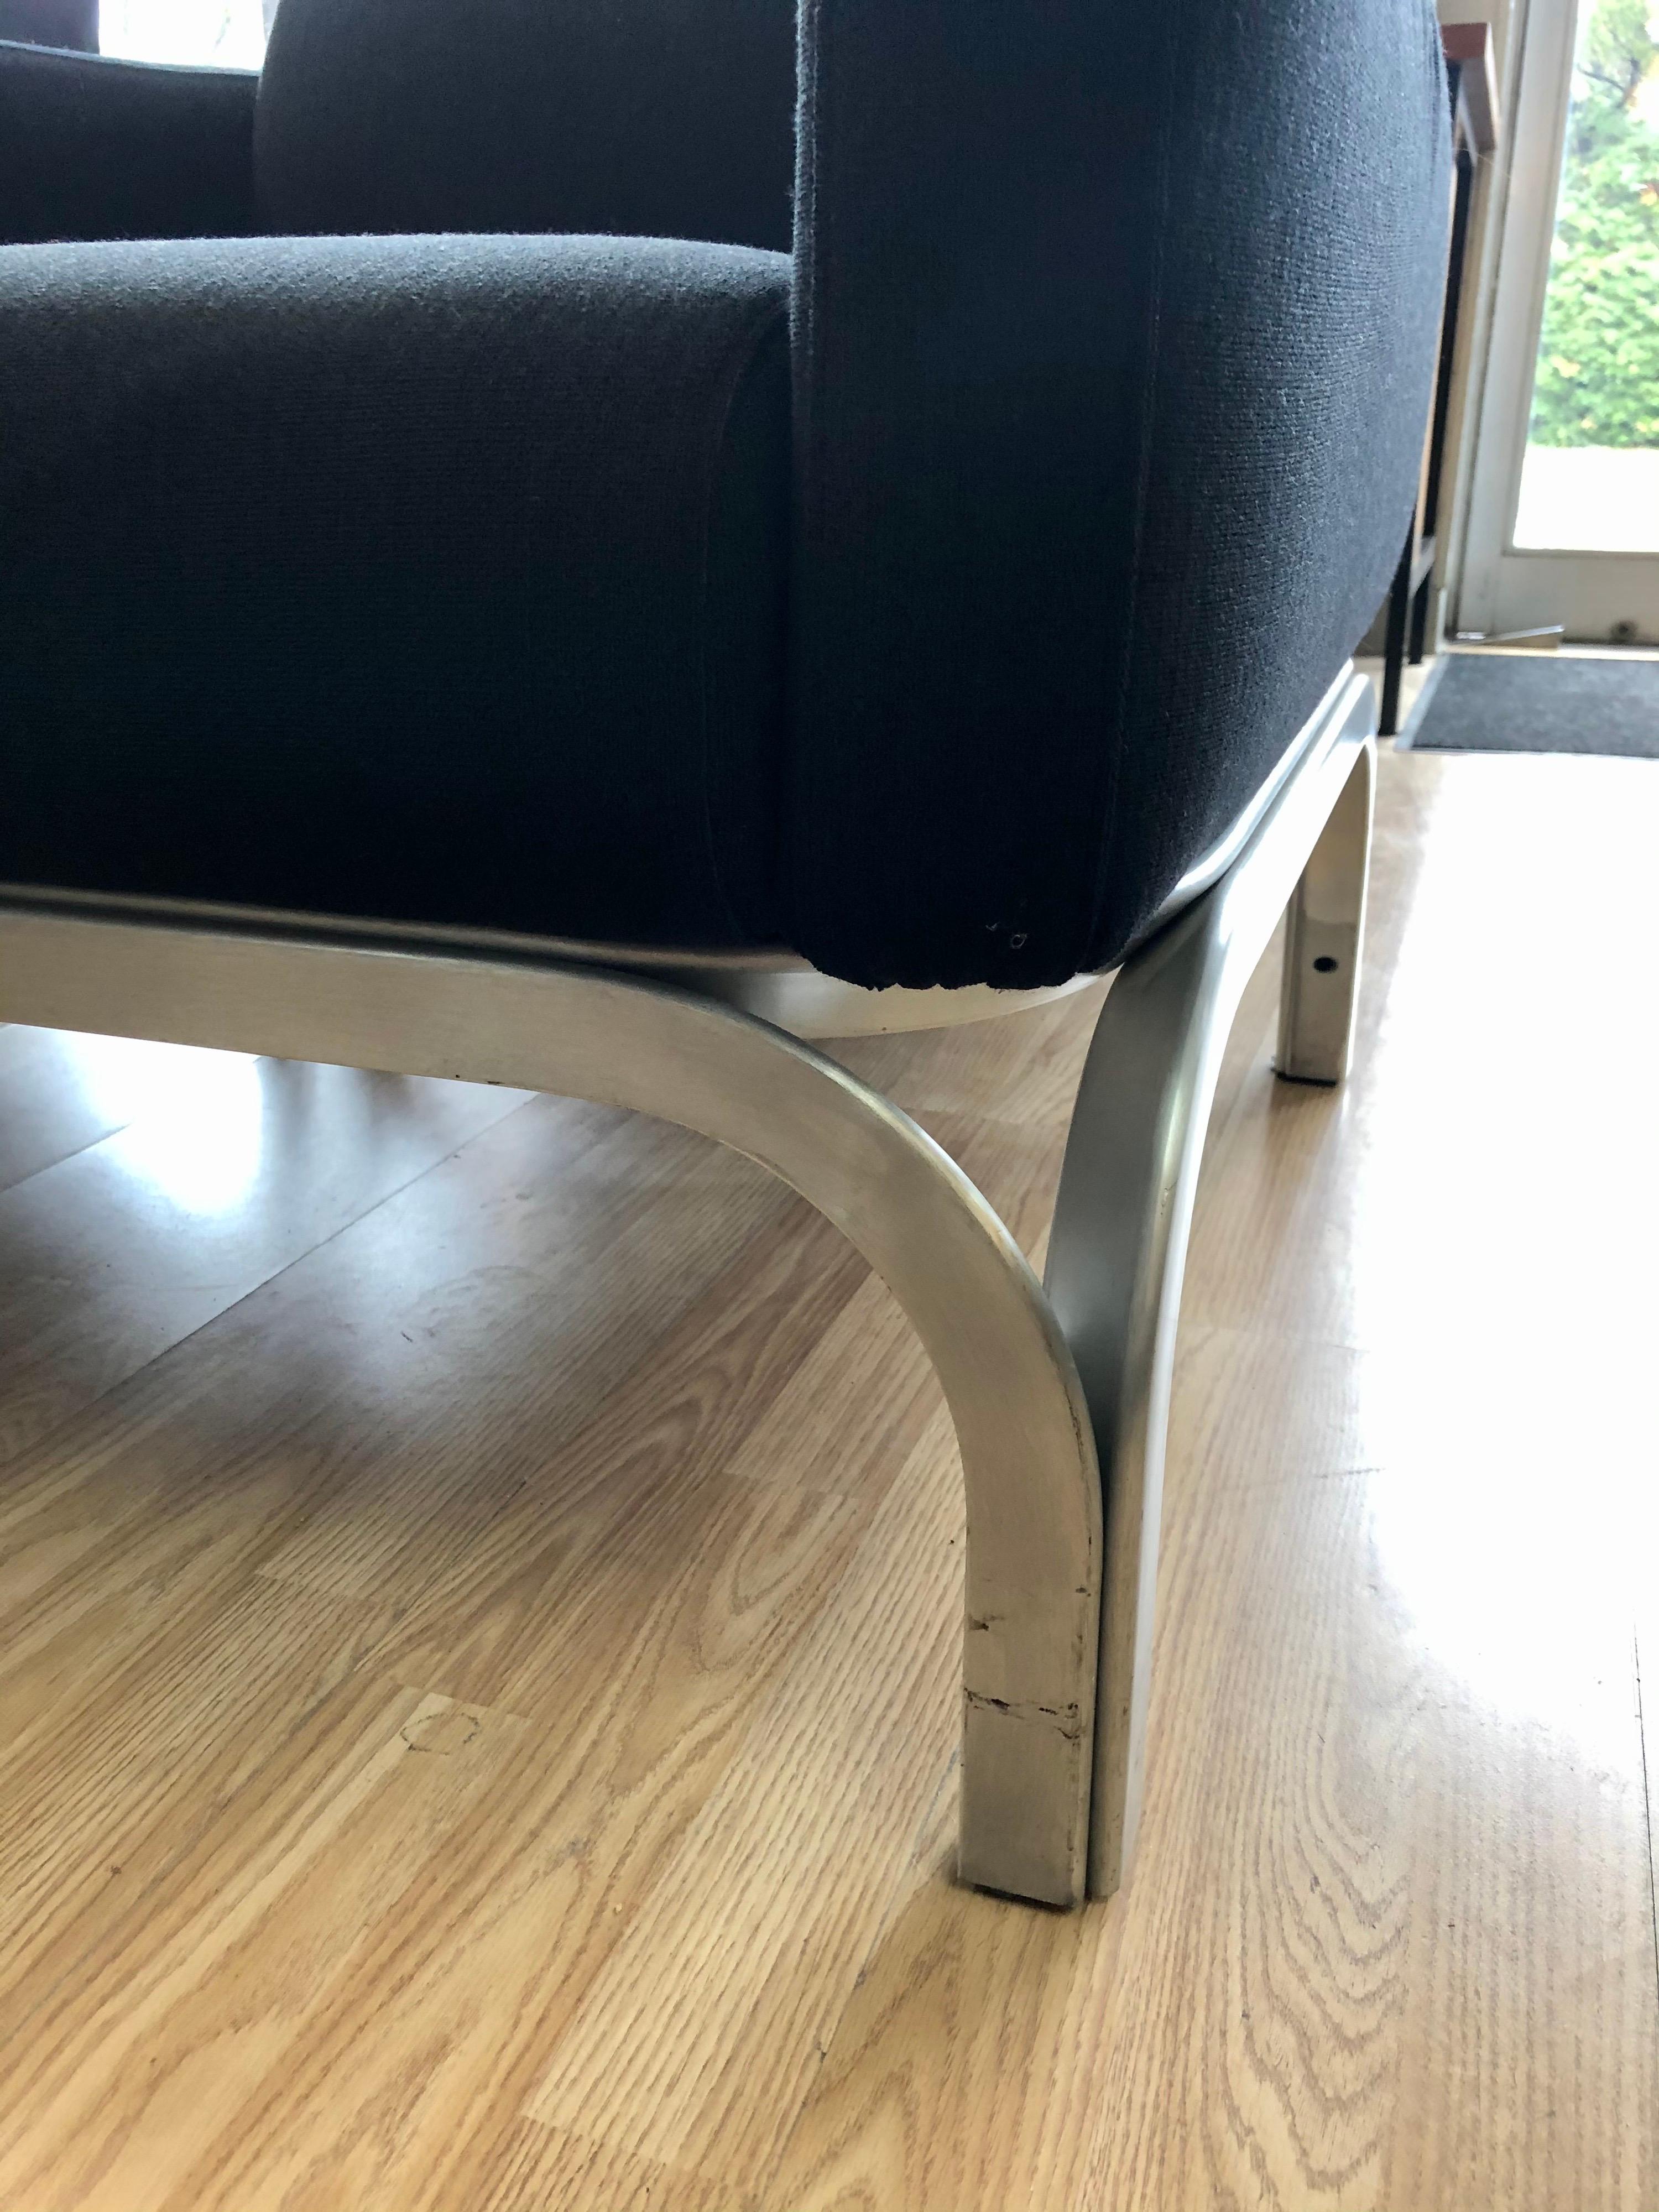 Designed by Fritz Hansen. Labeled. This pair is in overall good condition. Original black upholstery. Aluminum base.
1960s, Denmark.
Dimensions:
26.5” H x 28.5” D x 28” W
16” seat height
21.5” arm height.